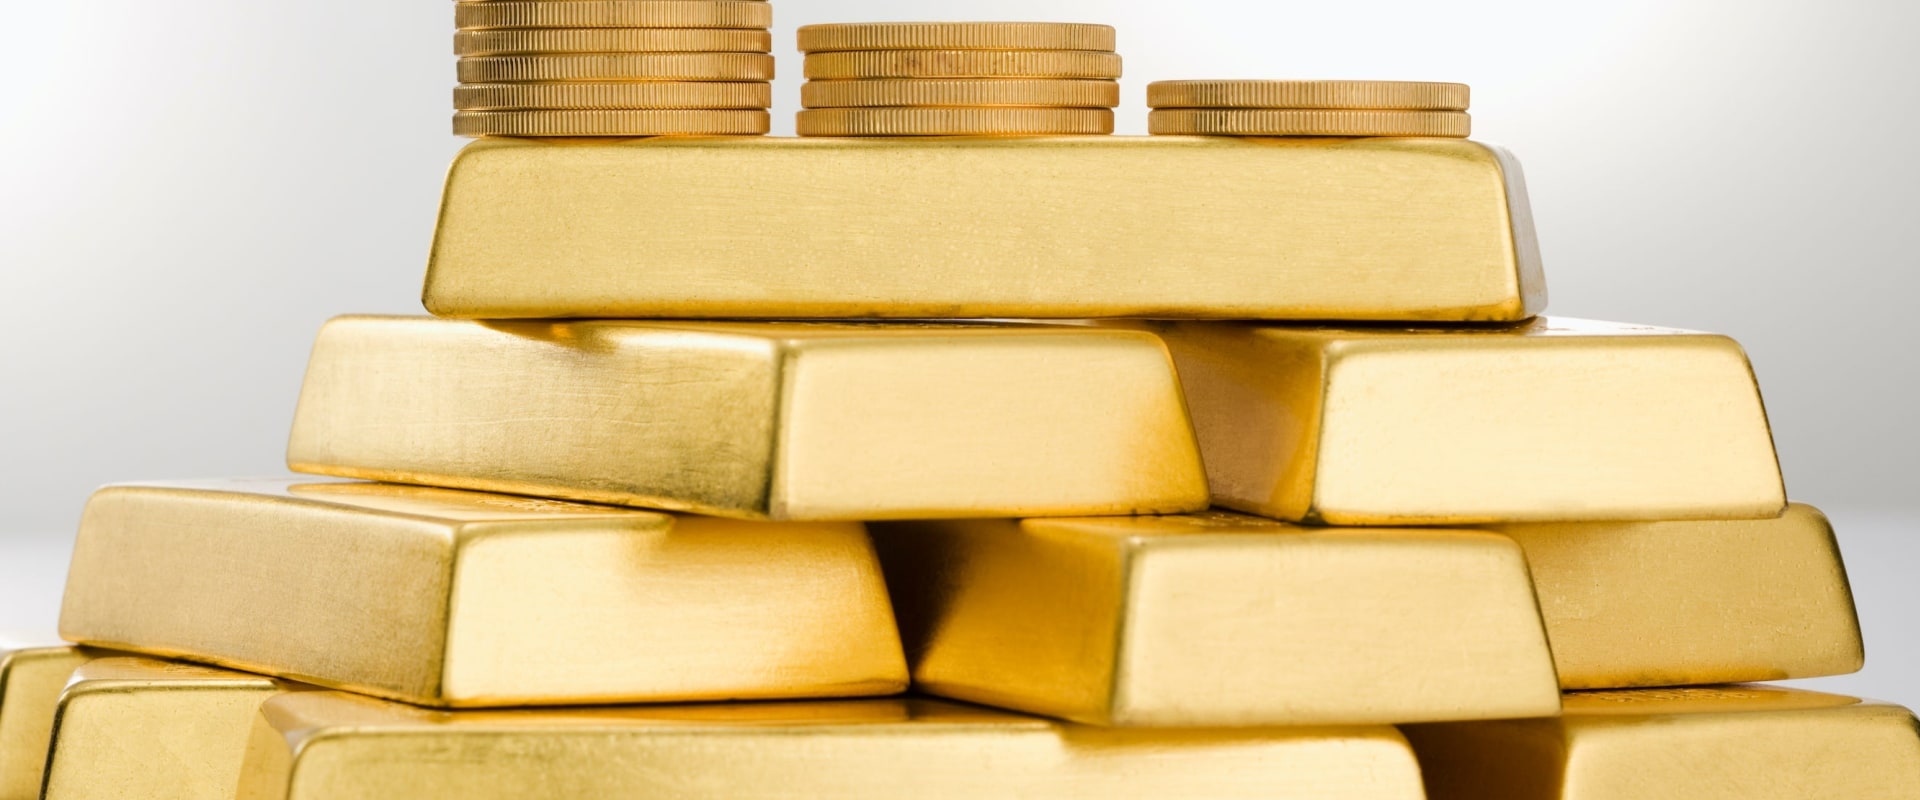 How to invest in roth ira gold?